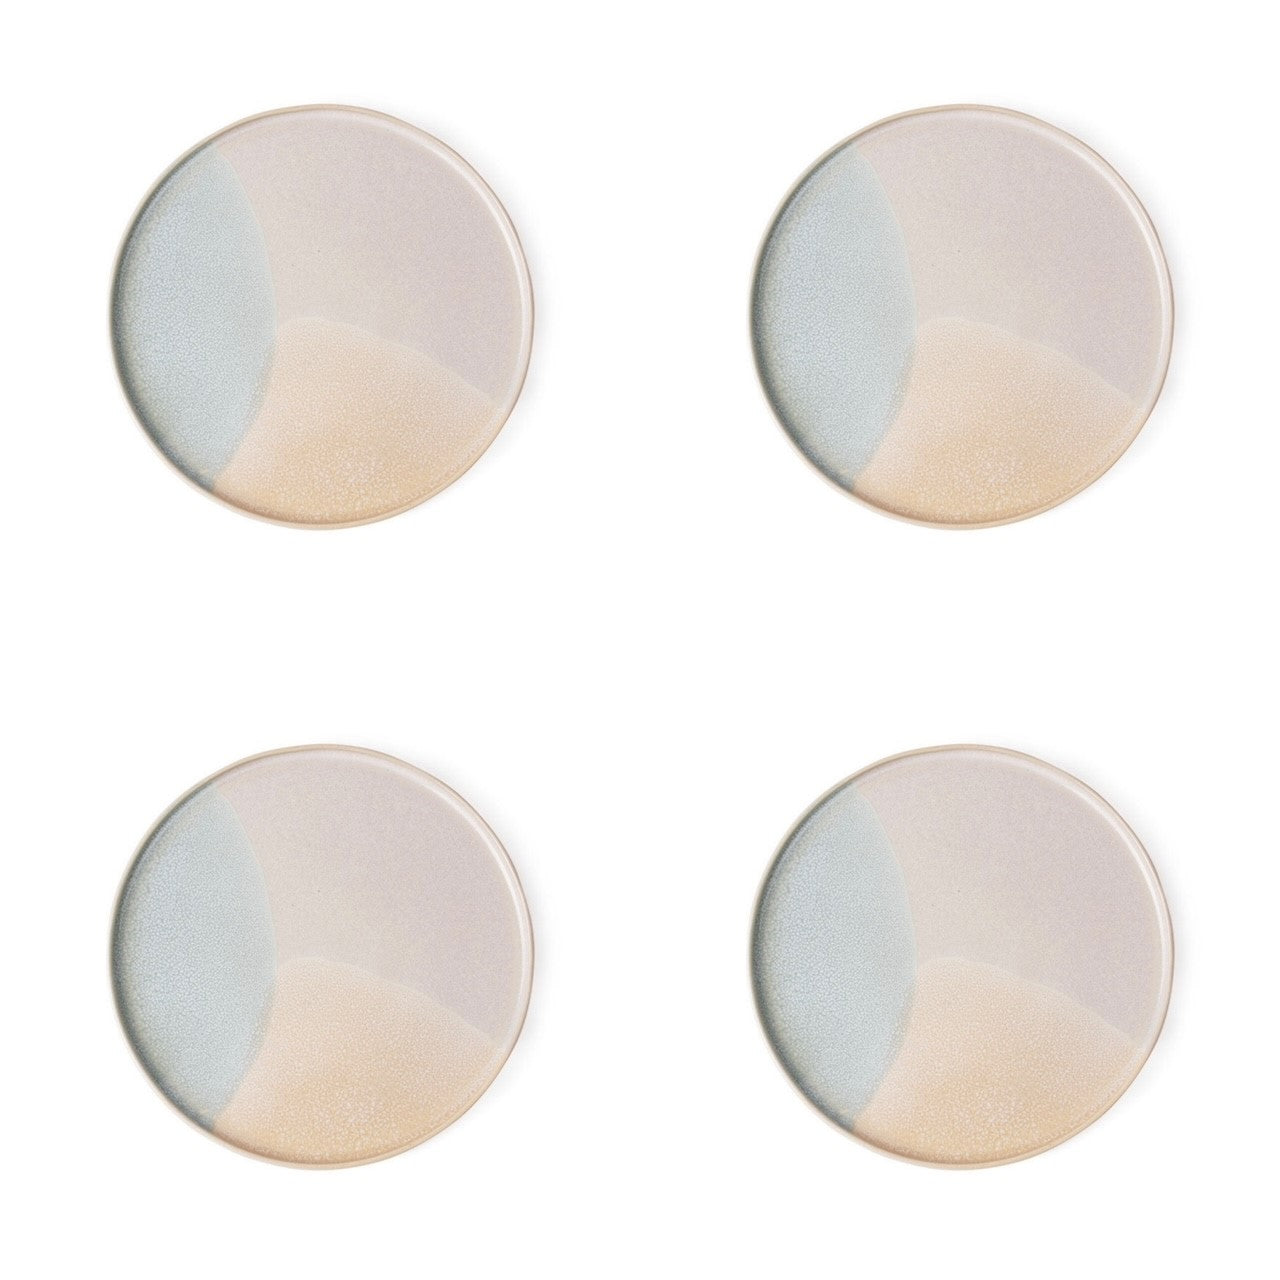 4 round side plates with pastel color finish